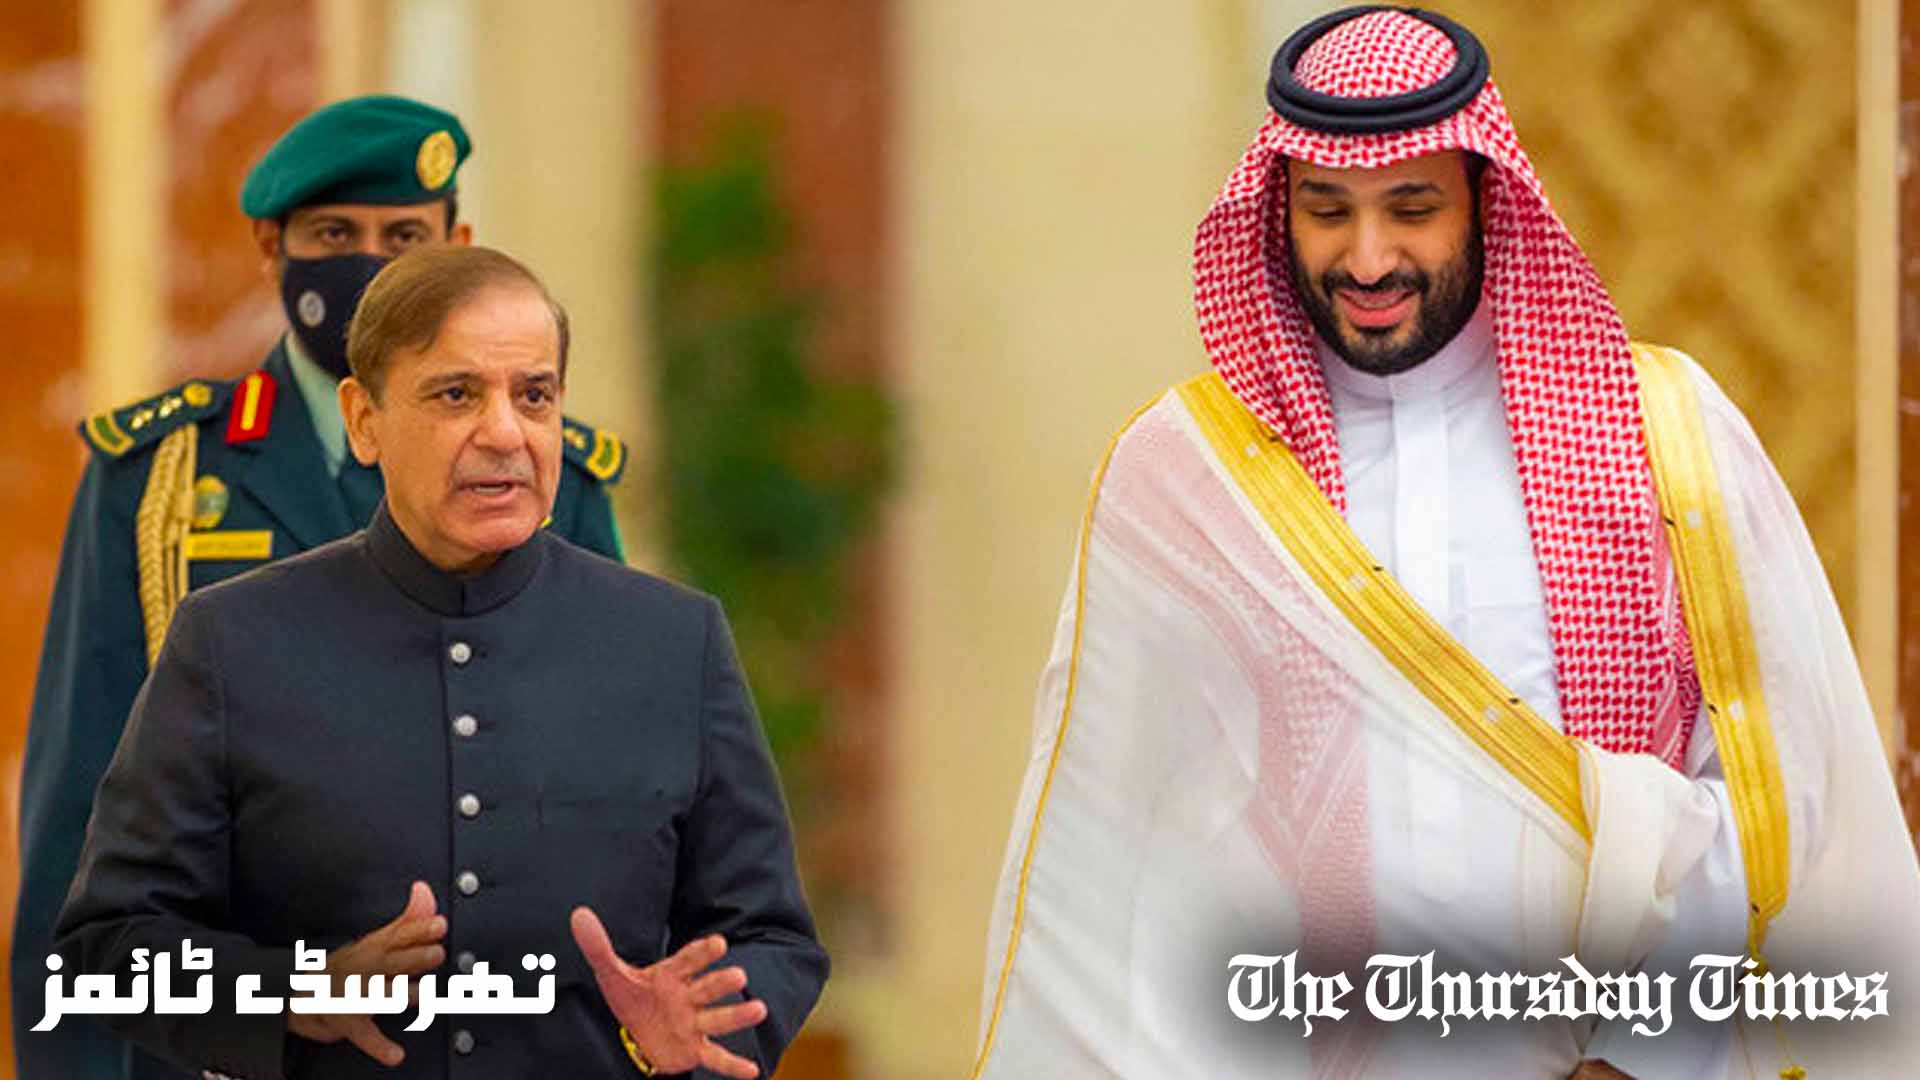 A file photo is shown of Pakistani prime minister Shehbaz Sharif and Saudi crown prince Mohammad bin Salman. — FILE/THE THURSDAY TIMES